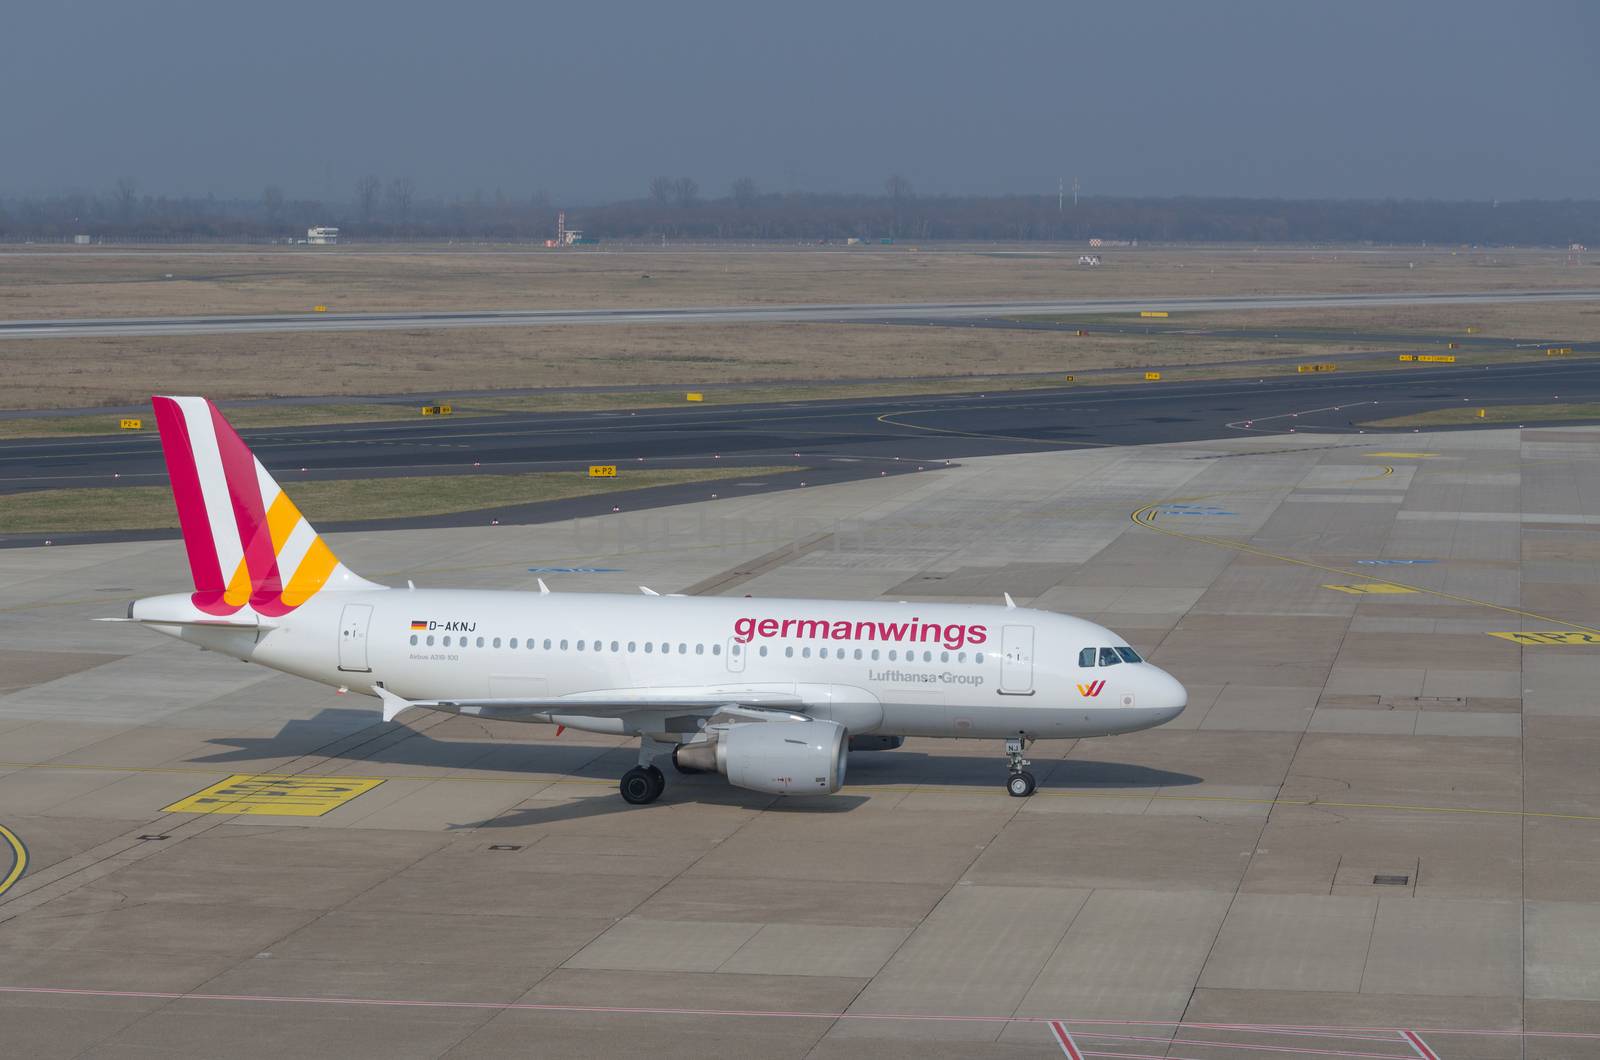 Dusseldorf, Nrw, Germany - March 18, 2015: German Wings Airbus A319 landing at the Dusseldorf airport. Drive  to the Terminal boarding passengers.